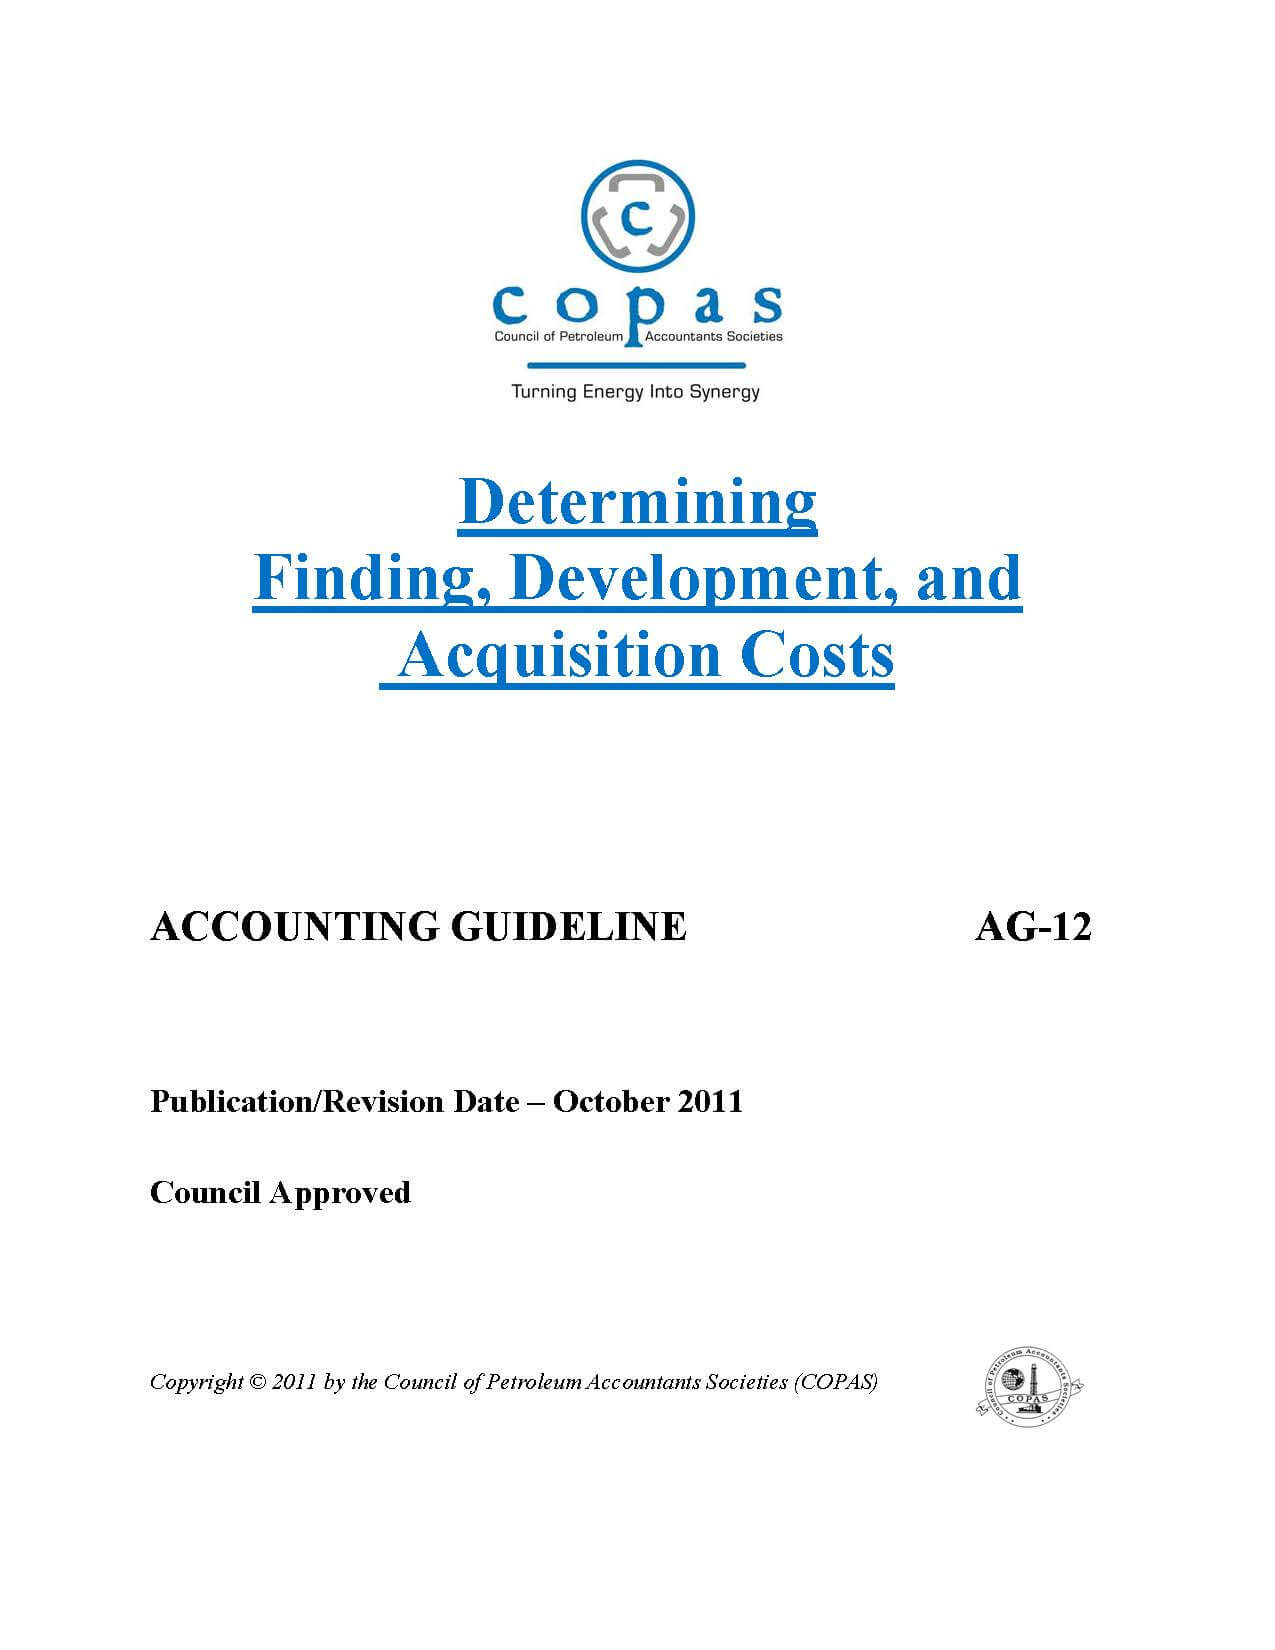 AG-12 Determining Finding, Development, and Acquisition Costs